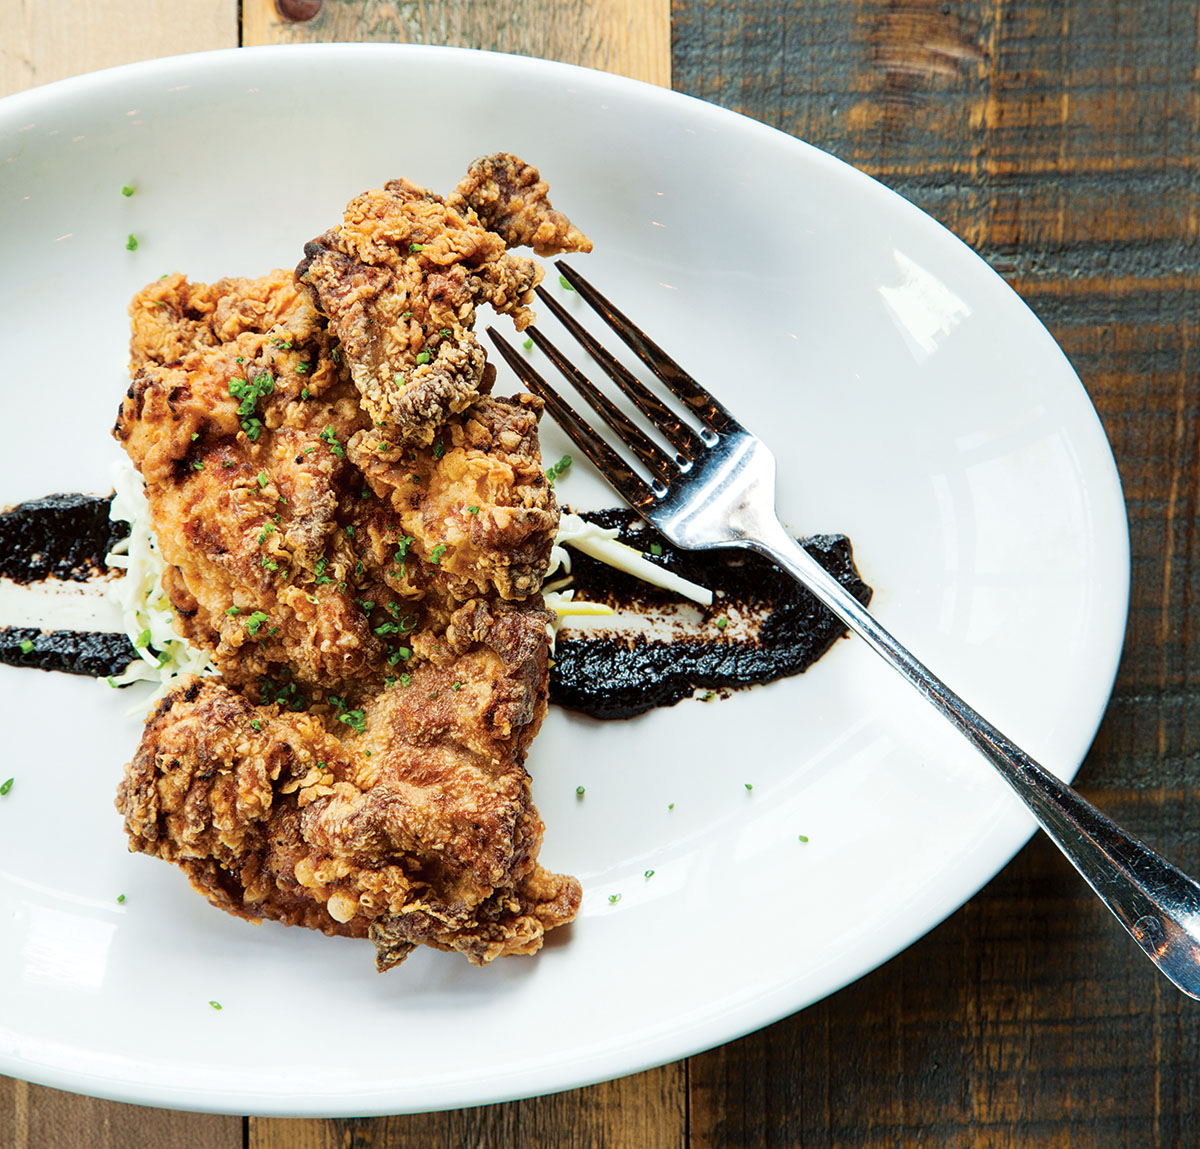 The buttermilk-fried chicken thighs. Photograph by Anthony Tieuli.